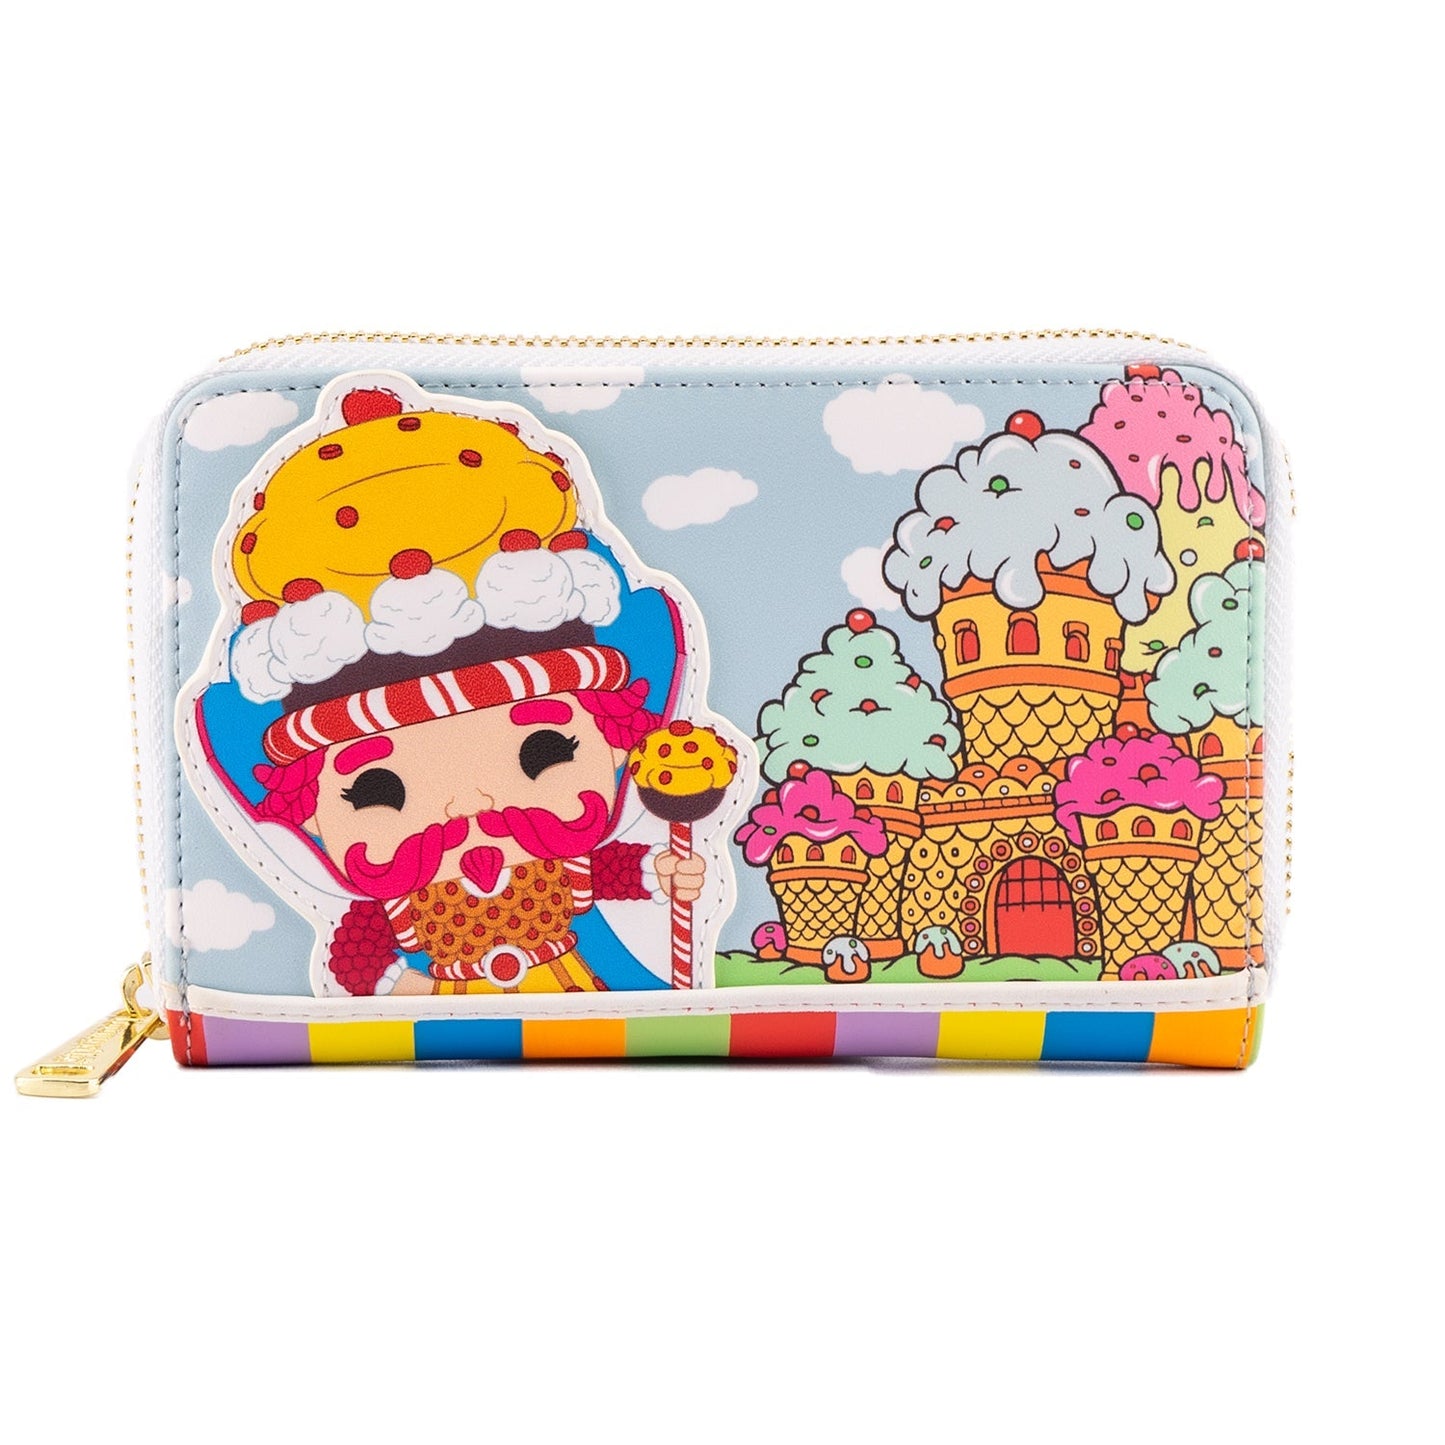 Funko Pop! By Loungefly Candyland Take Me To The Candy Zip-Around Wallet